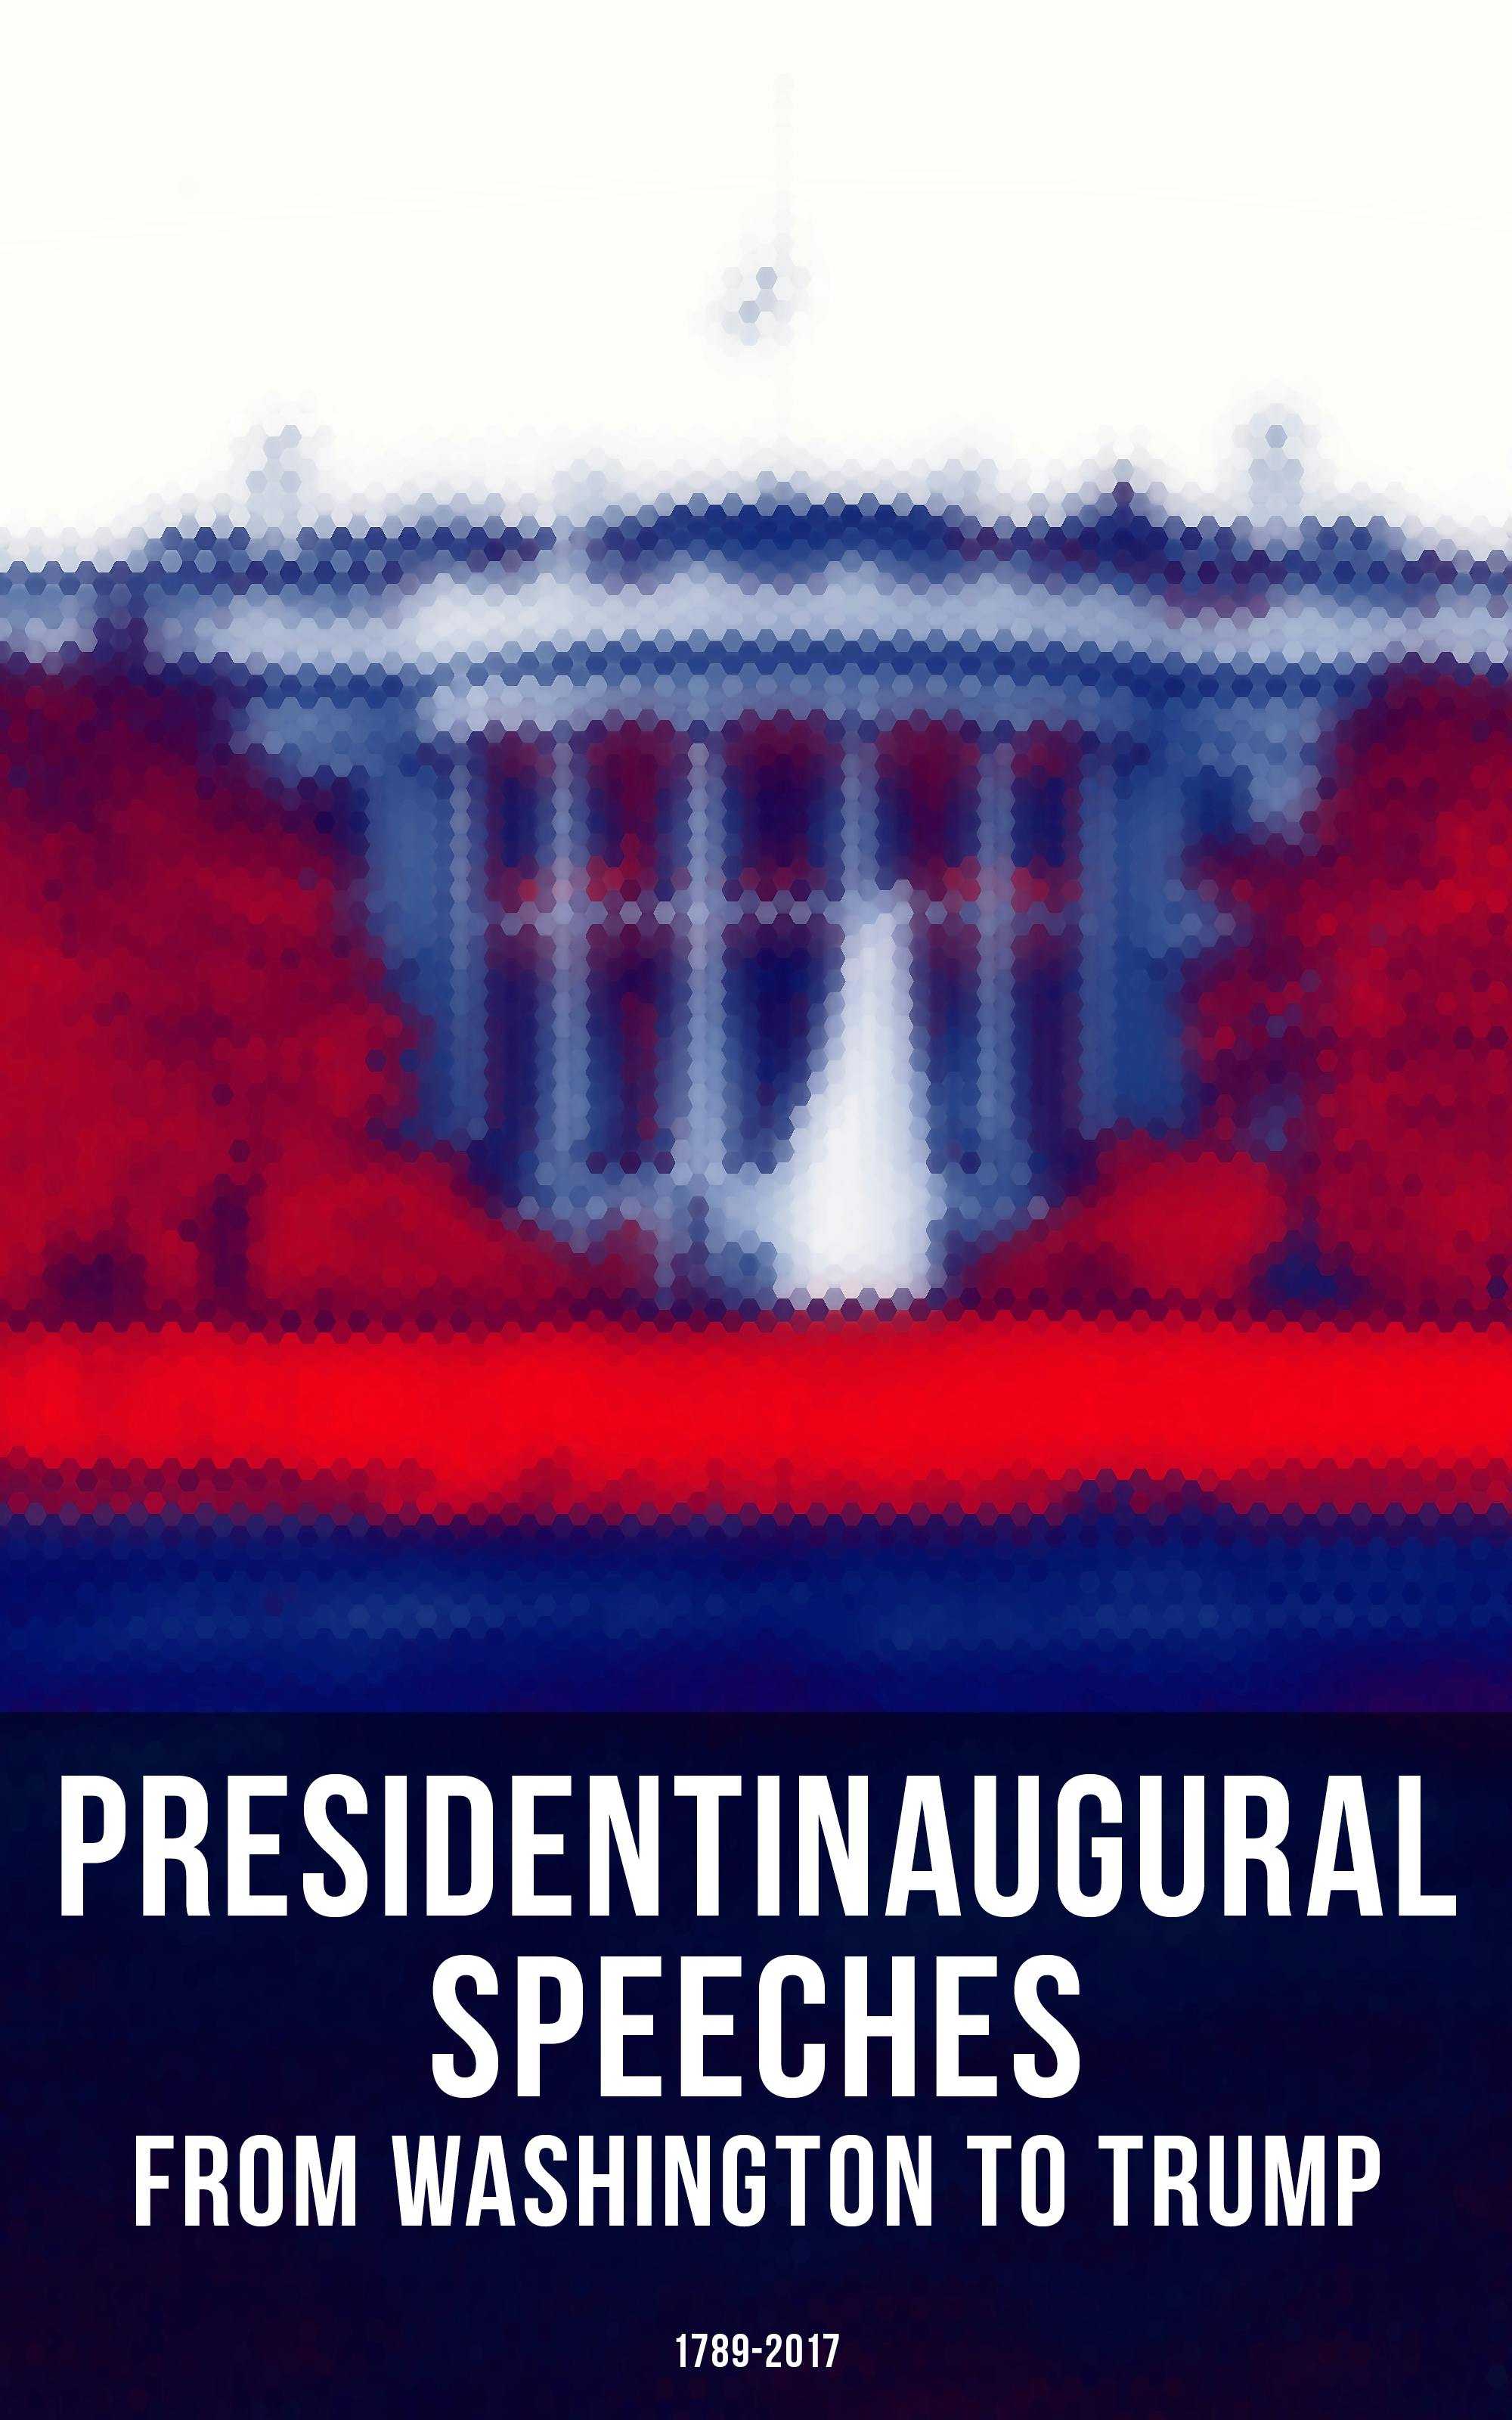 President's Inaugural Speeches: From Washington to Trump (1789-2017): The Rise and Development of America Through the Ambitions and Platforms of Elected Presidents - undefined